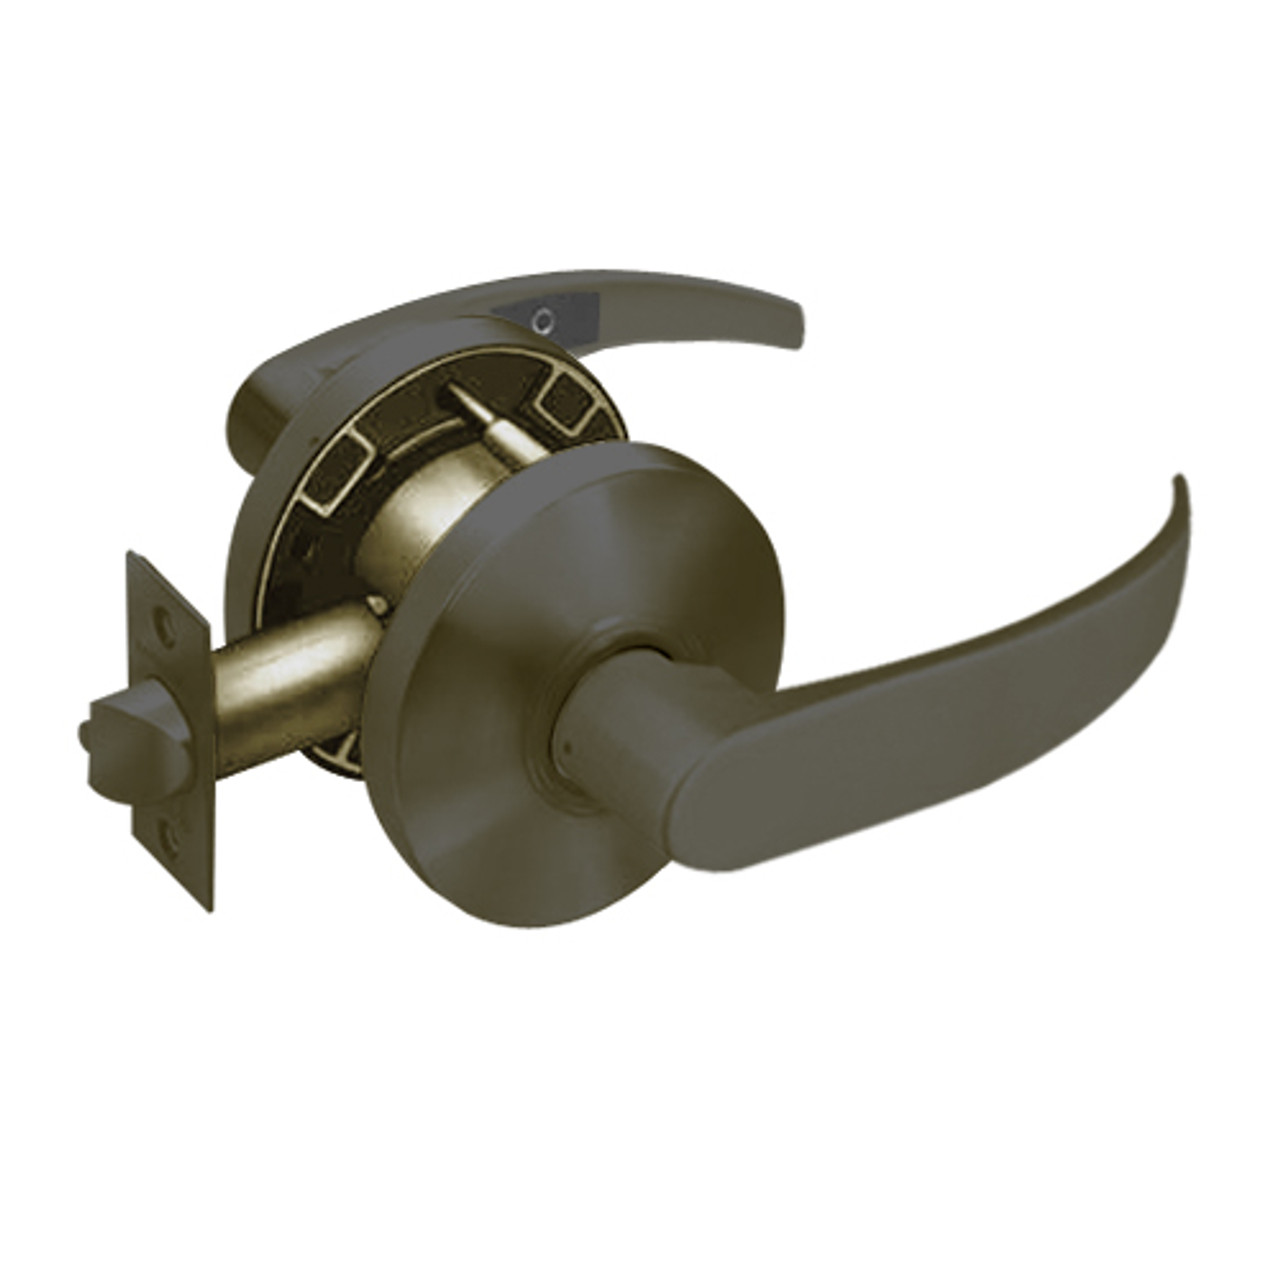 28-65U15-KP-10B Sargent 6500 Series Cylindrical Passage Locks with P Lever Design and K Rose in Oxidized Dull Bronze